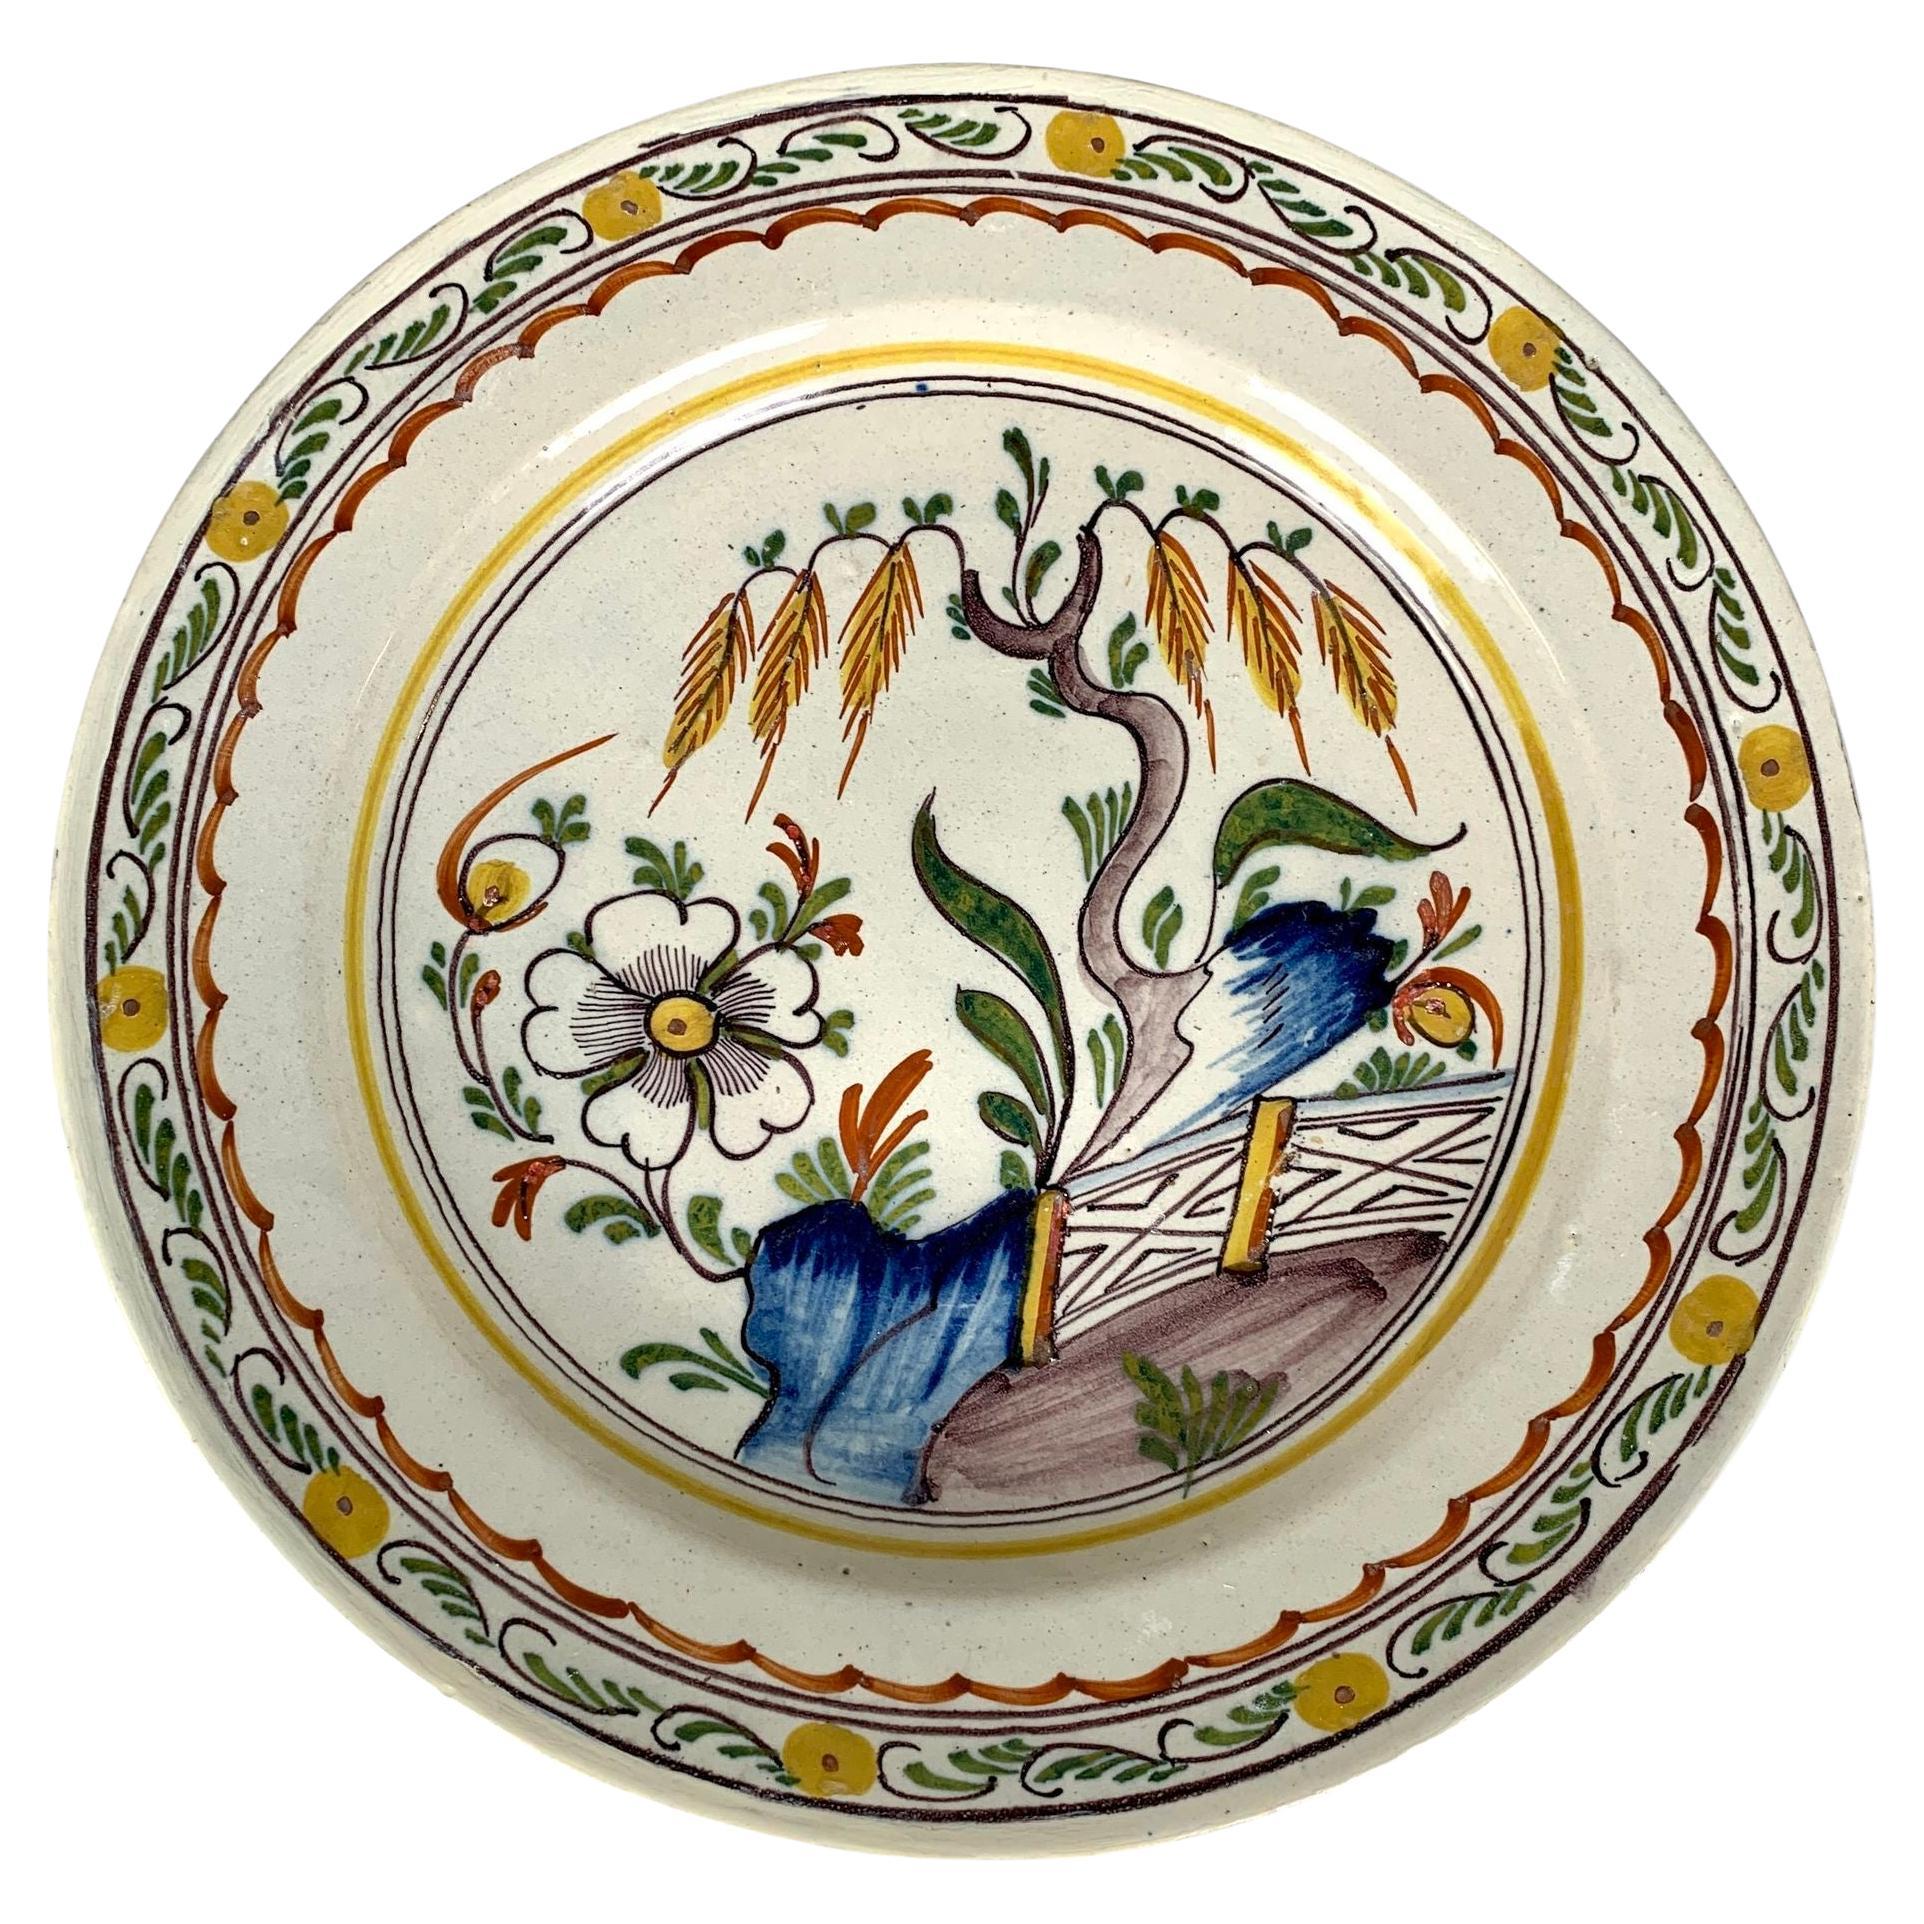 Dutch Delft Charger Hand Painted Polychrome Colors 18th Century Holland C-1780